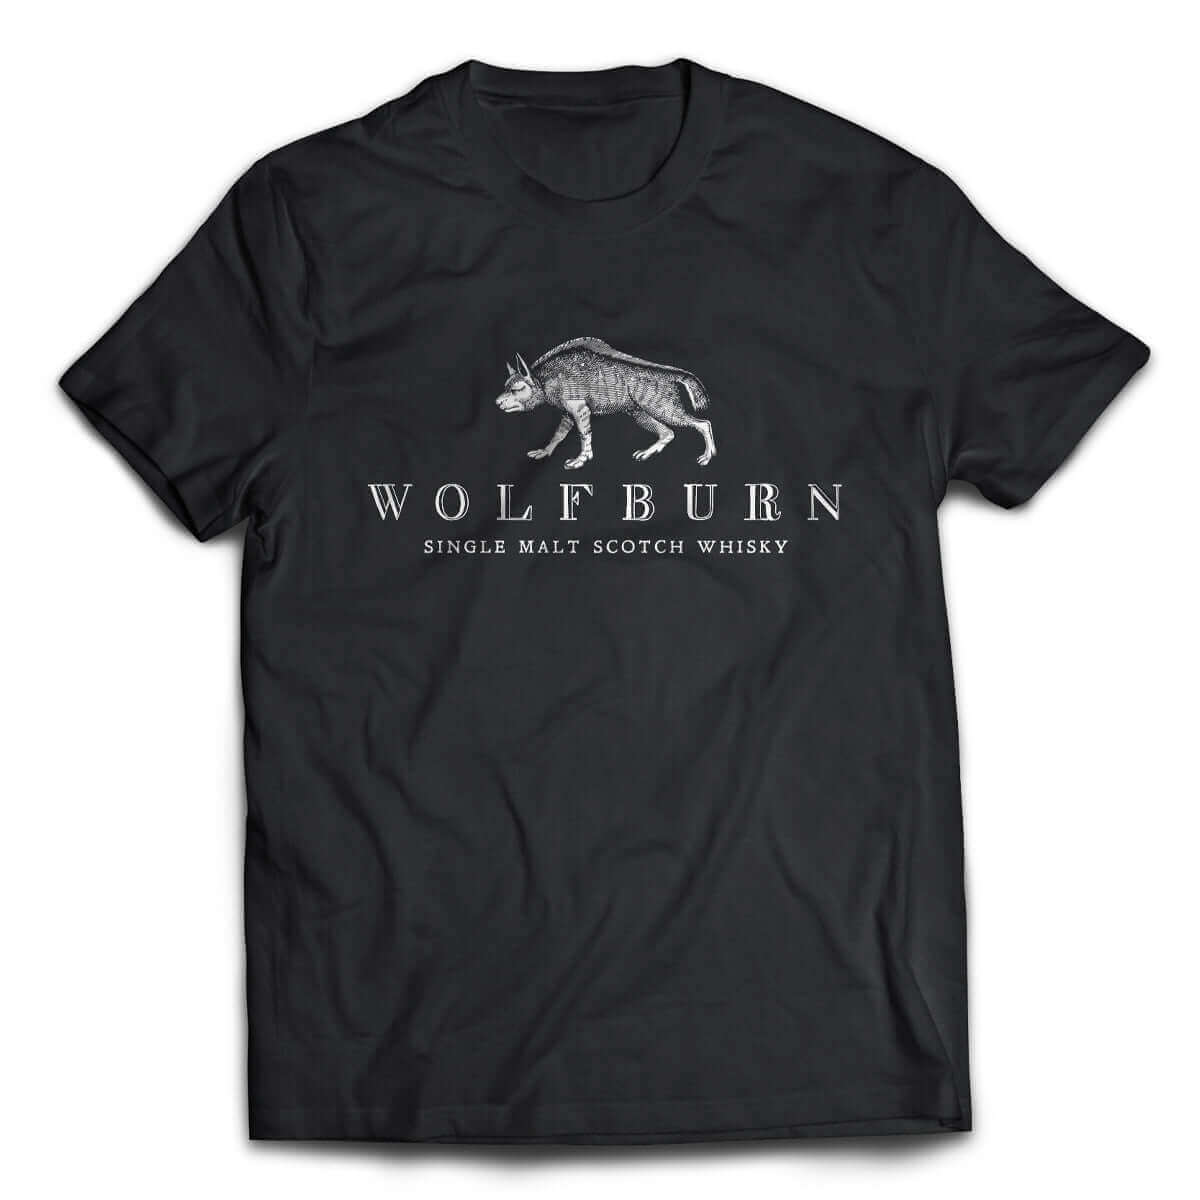 Wolfburn T-shirt 'Fortune favours the brave' Black 100% cotton t-shirt. Screen printed 'Wolfburn' logo on the chest and large Fortune Favours the Brave on the back.